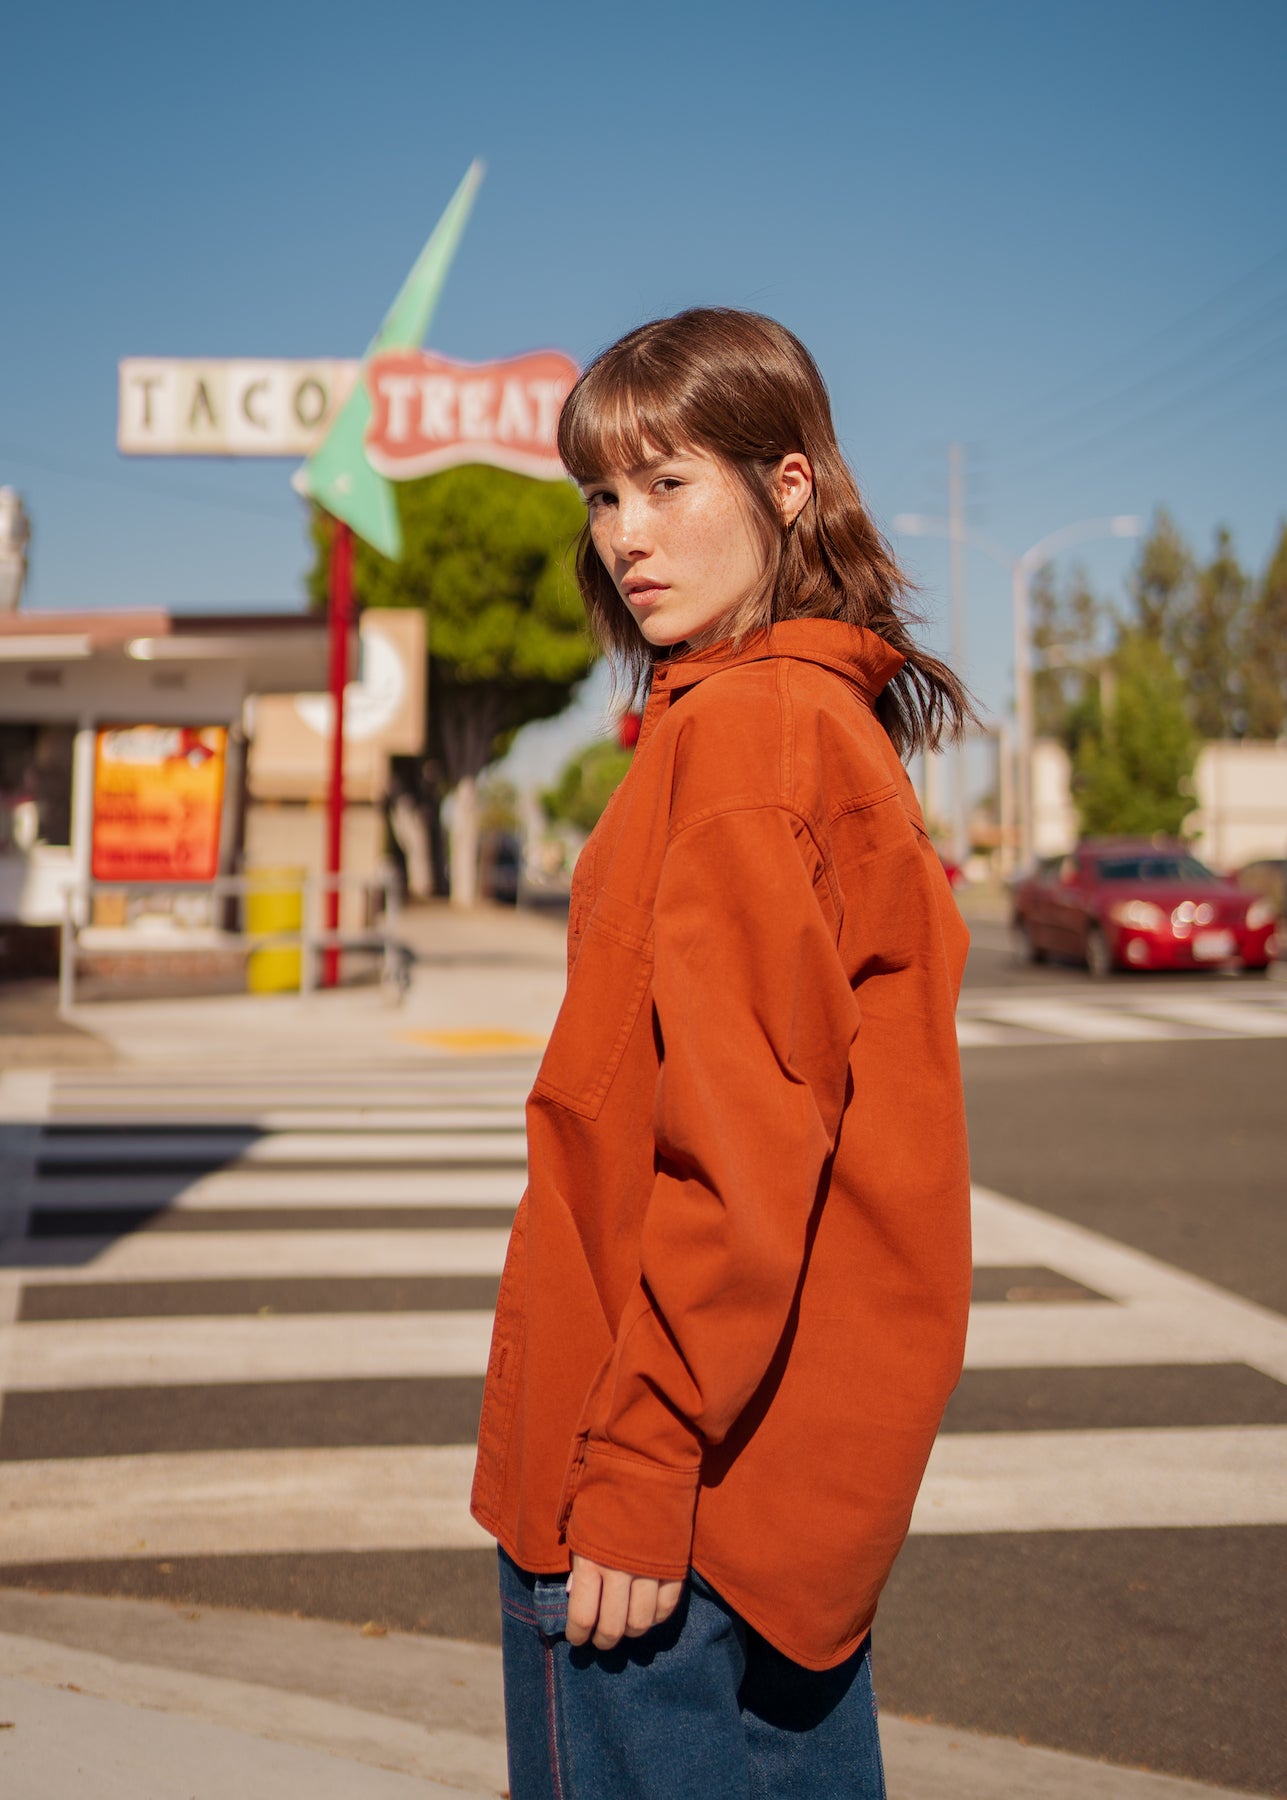 Hana is wearing Oversize Overshirt in Burnt Terracotta, Cropped Tank Top in Vintage Off-White and Carpenter Jeans in Dark Denim